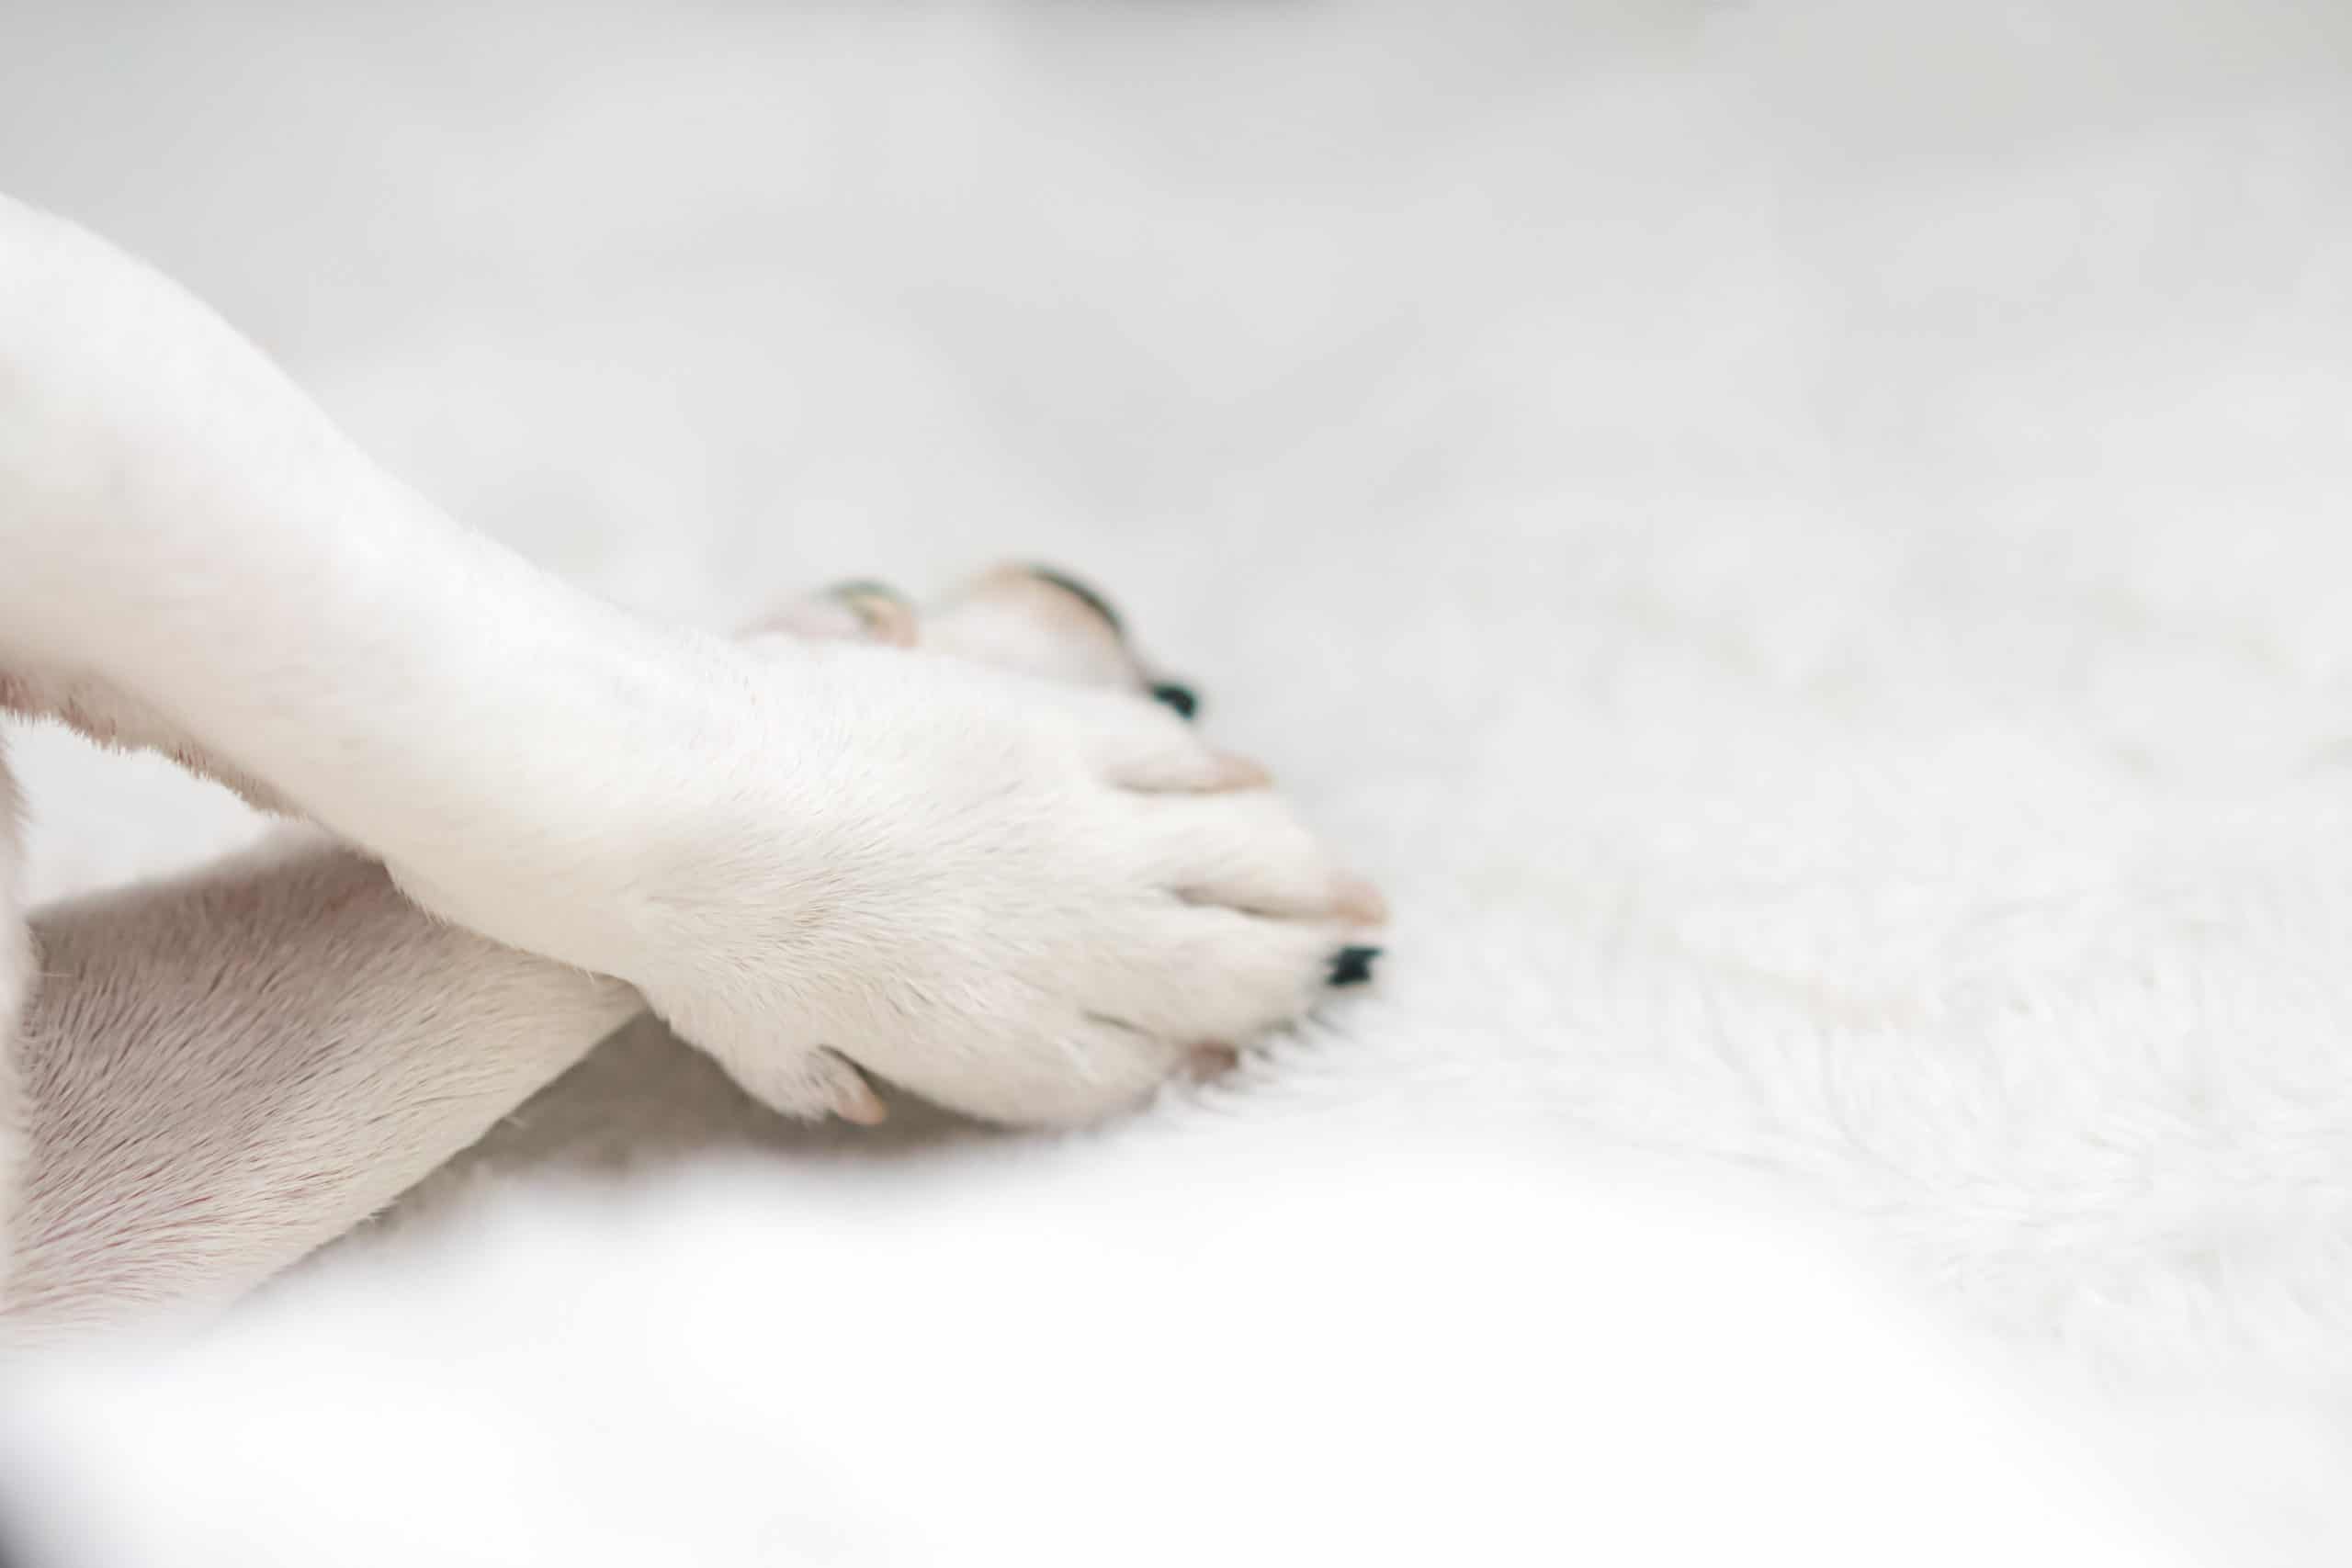 Can dogs shed their nails?